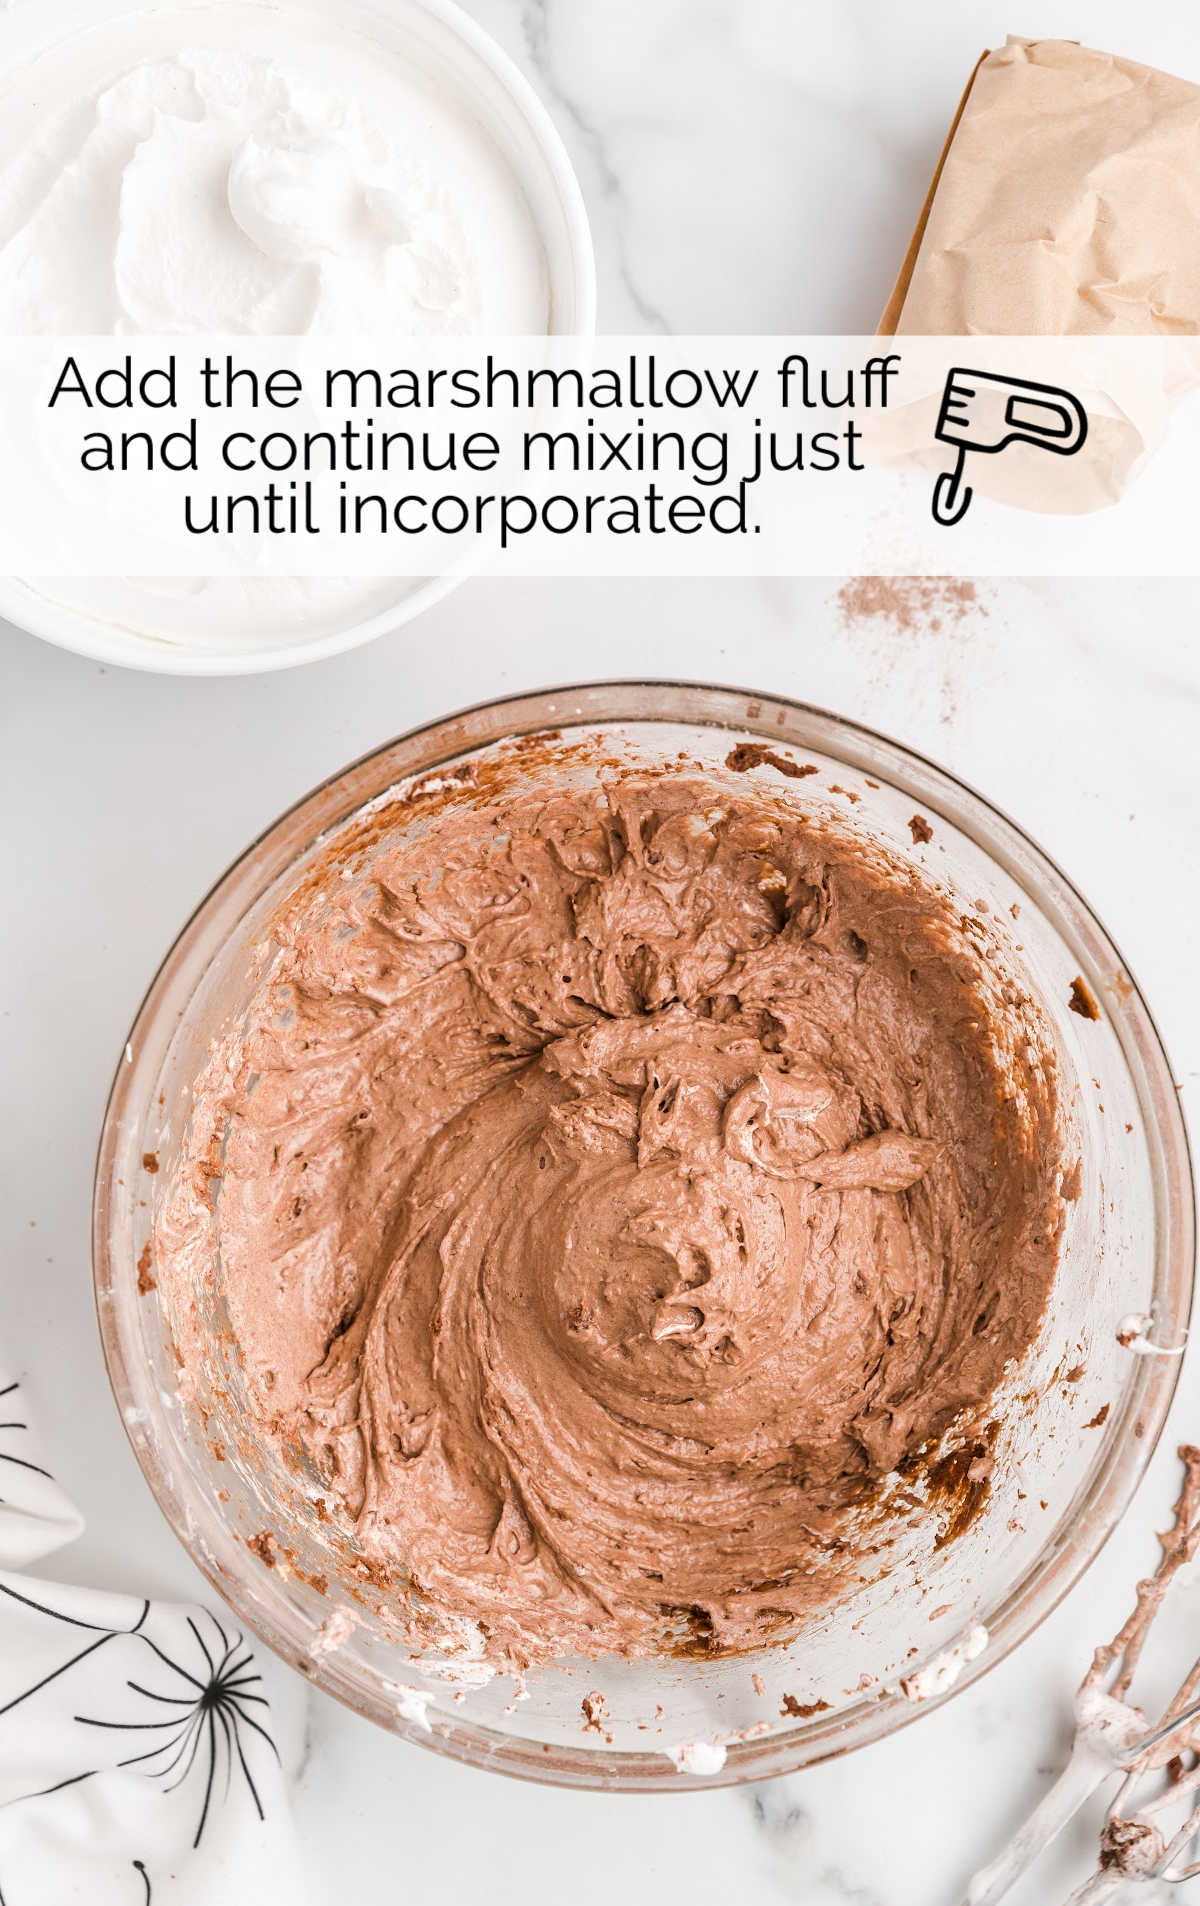 marshmallow fluff added to the cream cheese mixture in a bowl